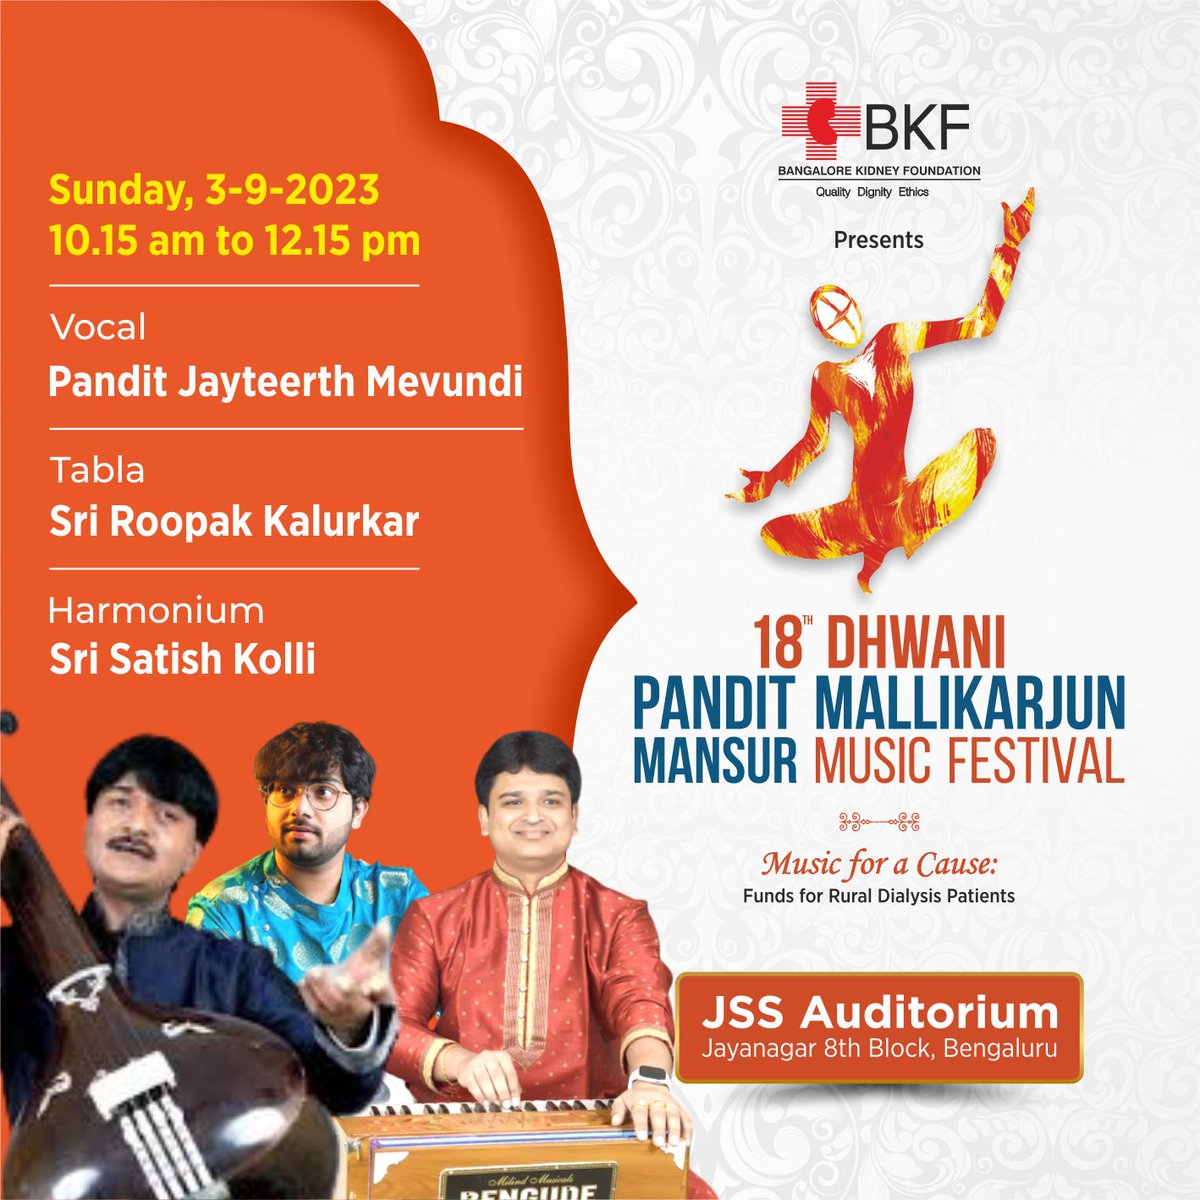 BKF invites you to a spellbinding concert by Pandit Jayteerth Mevundi on September 3rd at the JSS Auditorium in Bengaluru.

 For donor passes, call us at +91 9901788354.

#Dhwani2023 #hindustanimusicfestival #FundraiserEvent  #FundsforDialysispatients
#ruraldialysis #September23